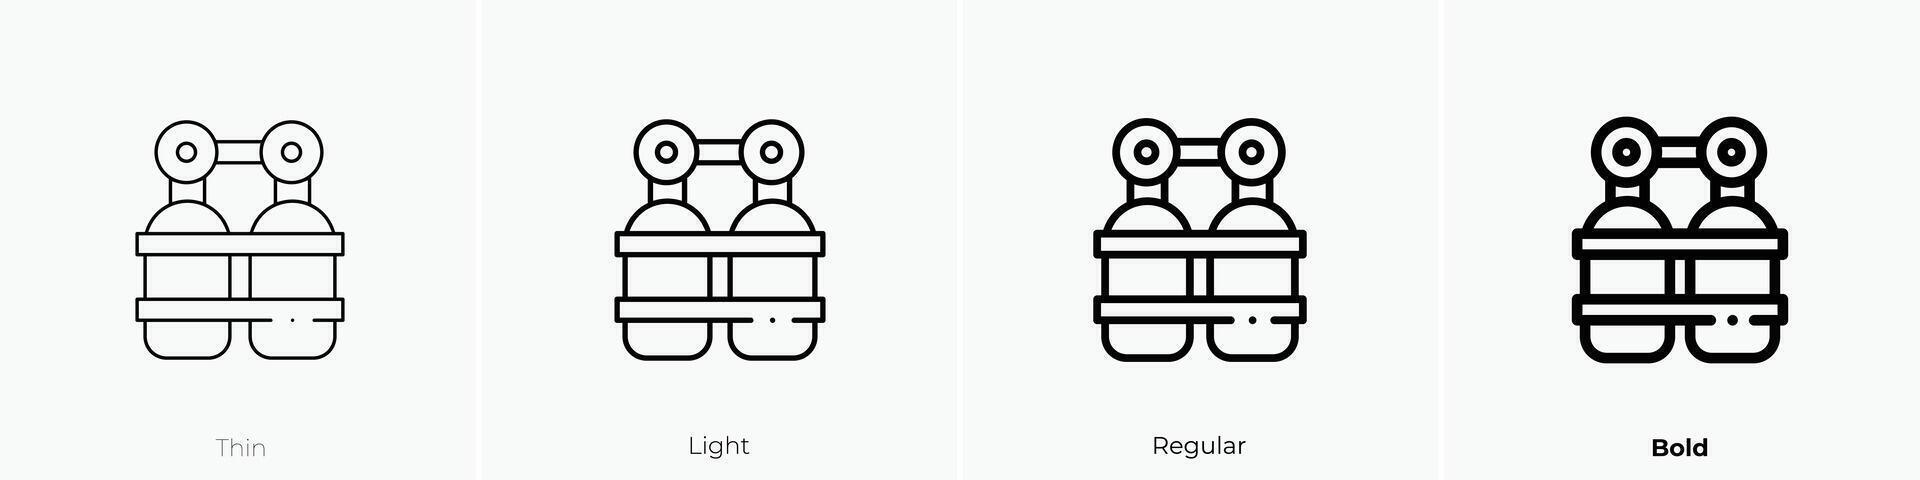 oxygen tank icon. Thin, Light, Regular And Bold style design isolated on white background vector